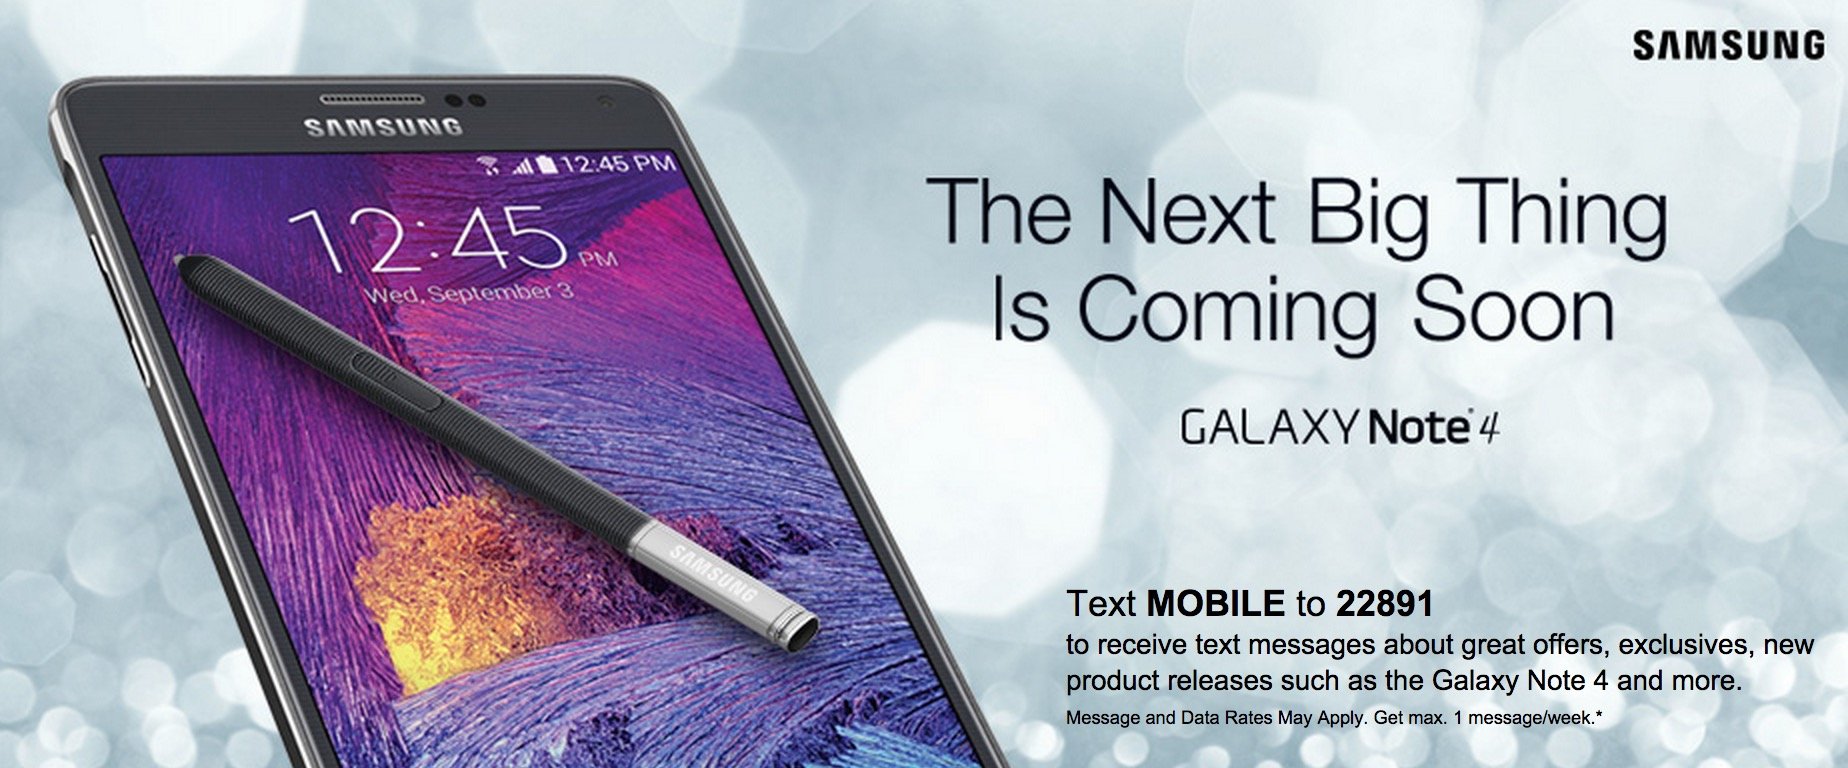 You can get your own Galaxy Note 4 hands on time before the release at select Best Buy stores.